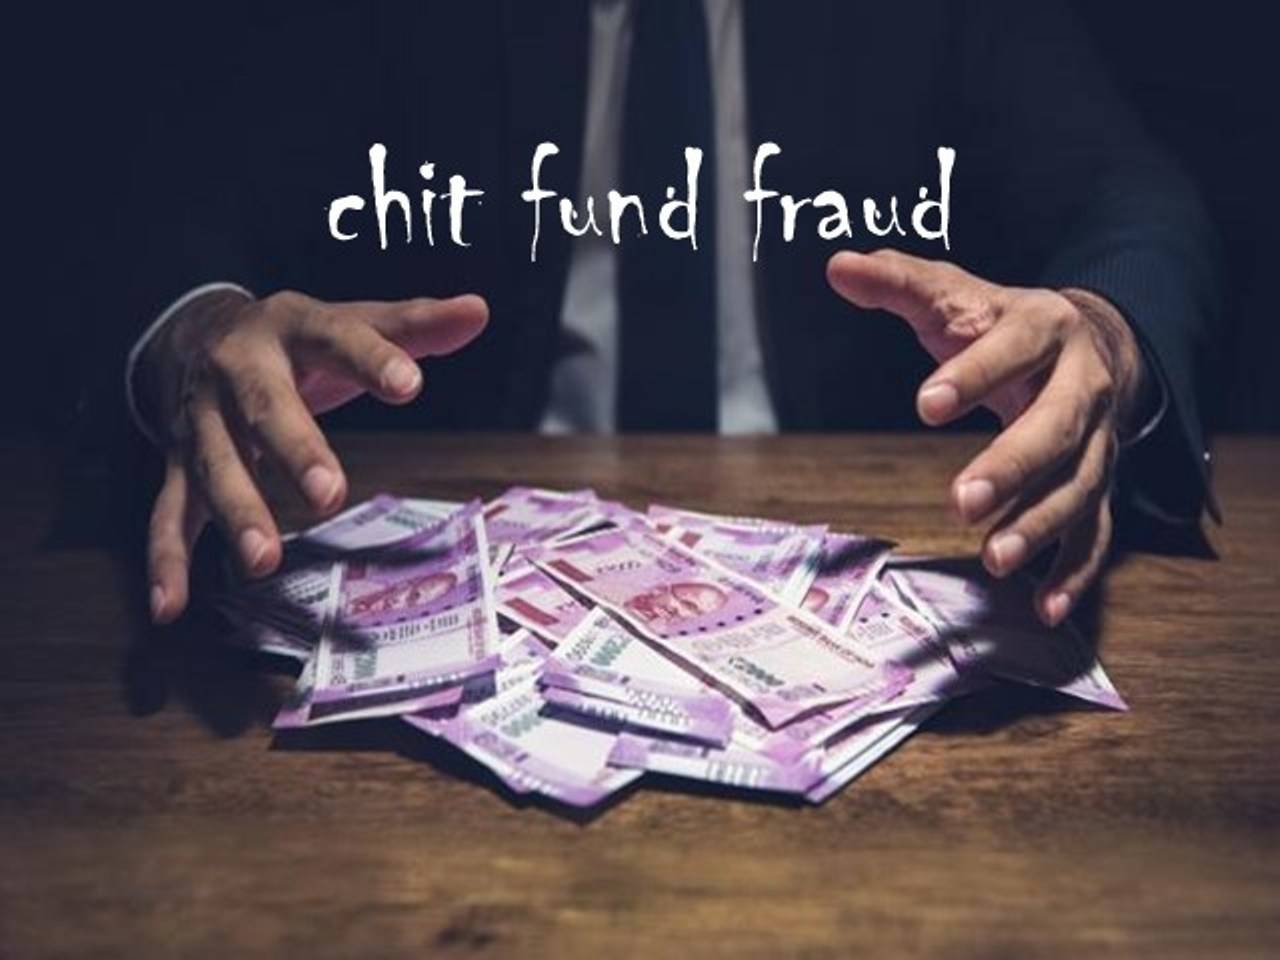 2 arrested in chit fund fraud case